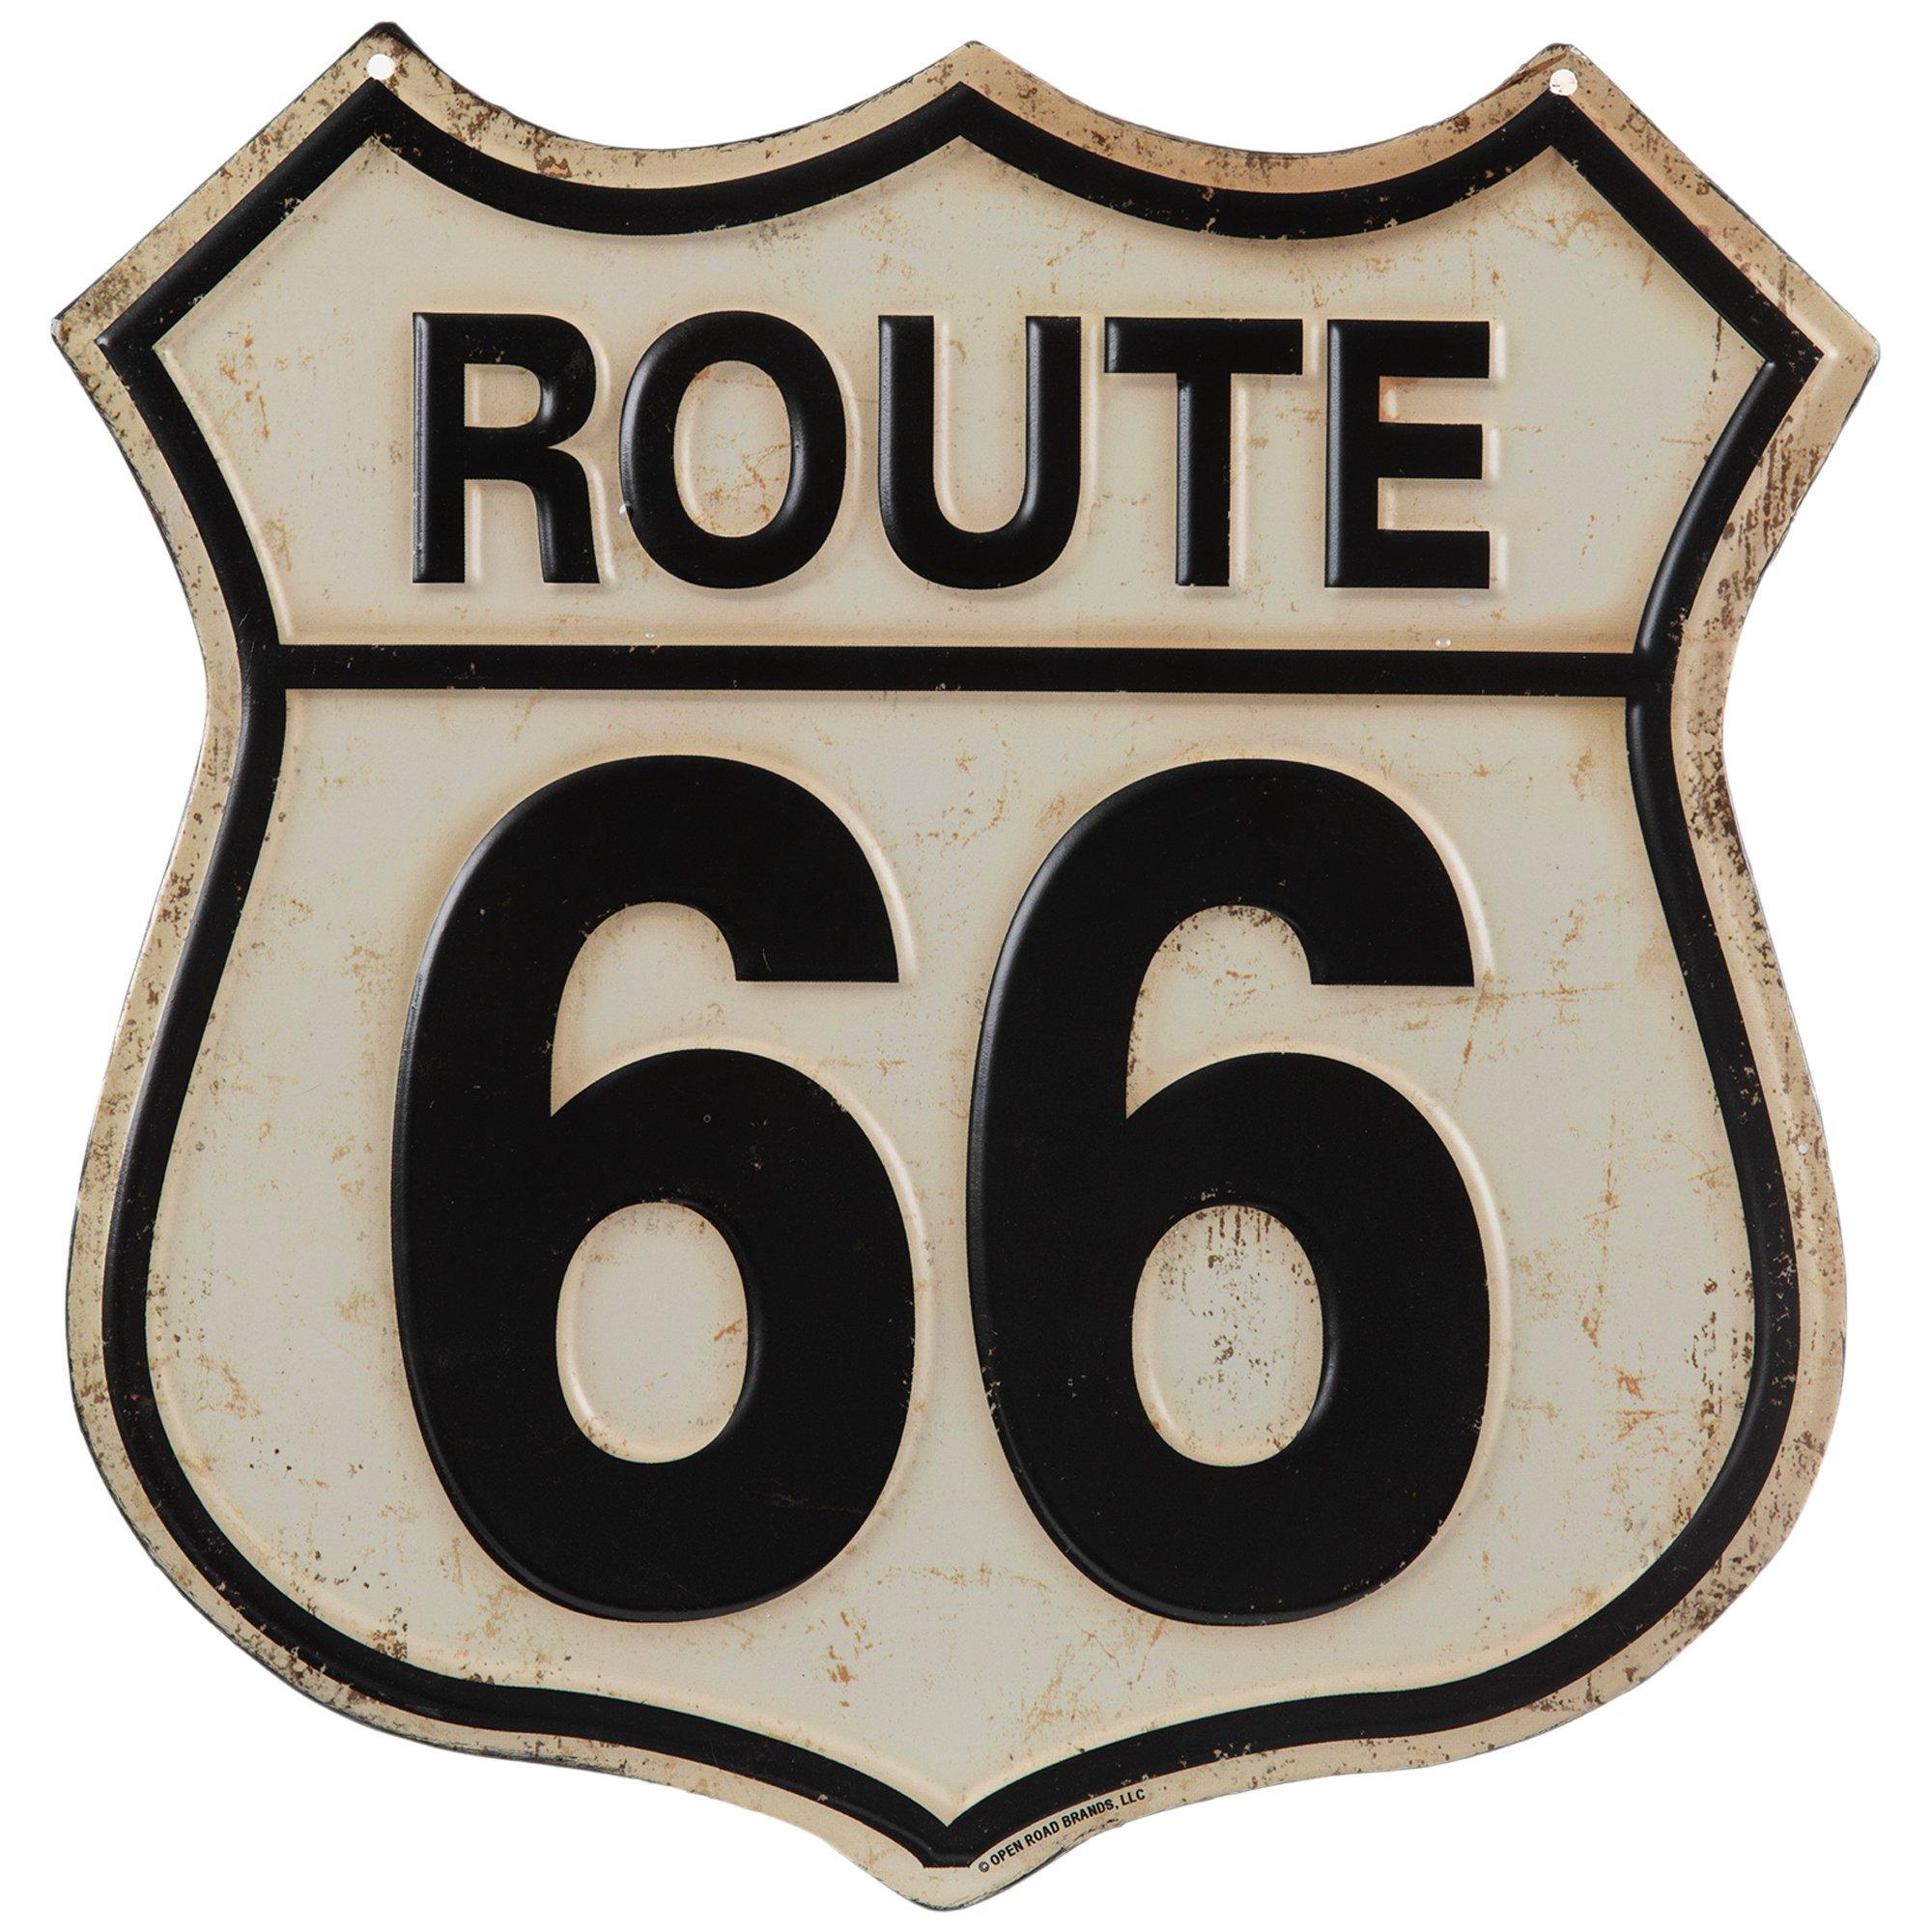 route 66 sign